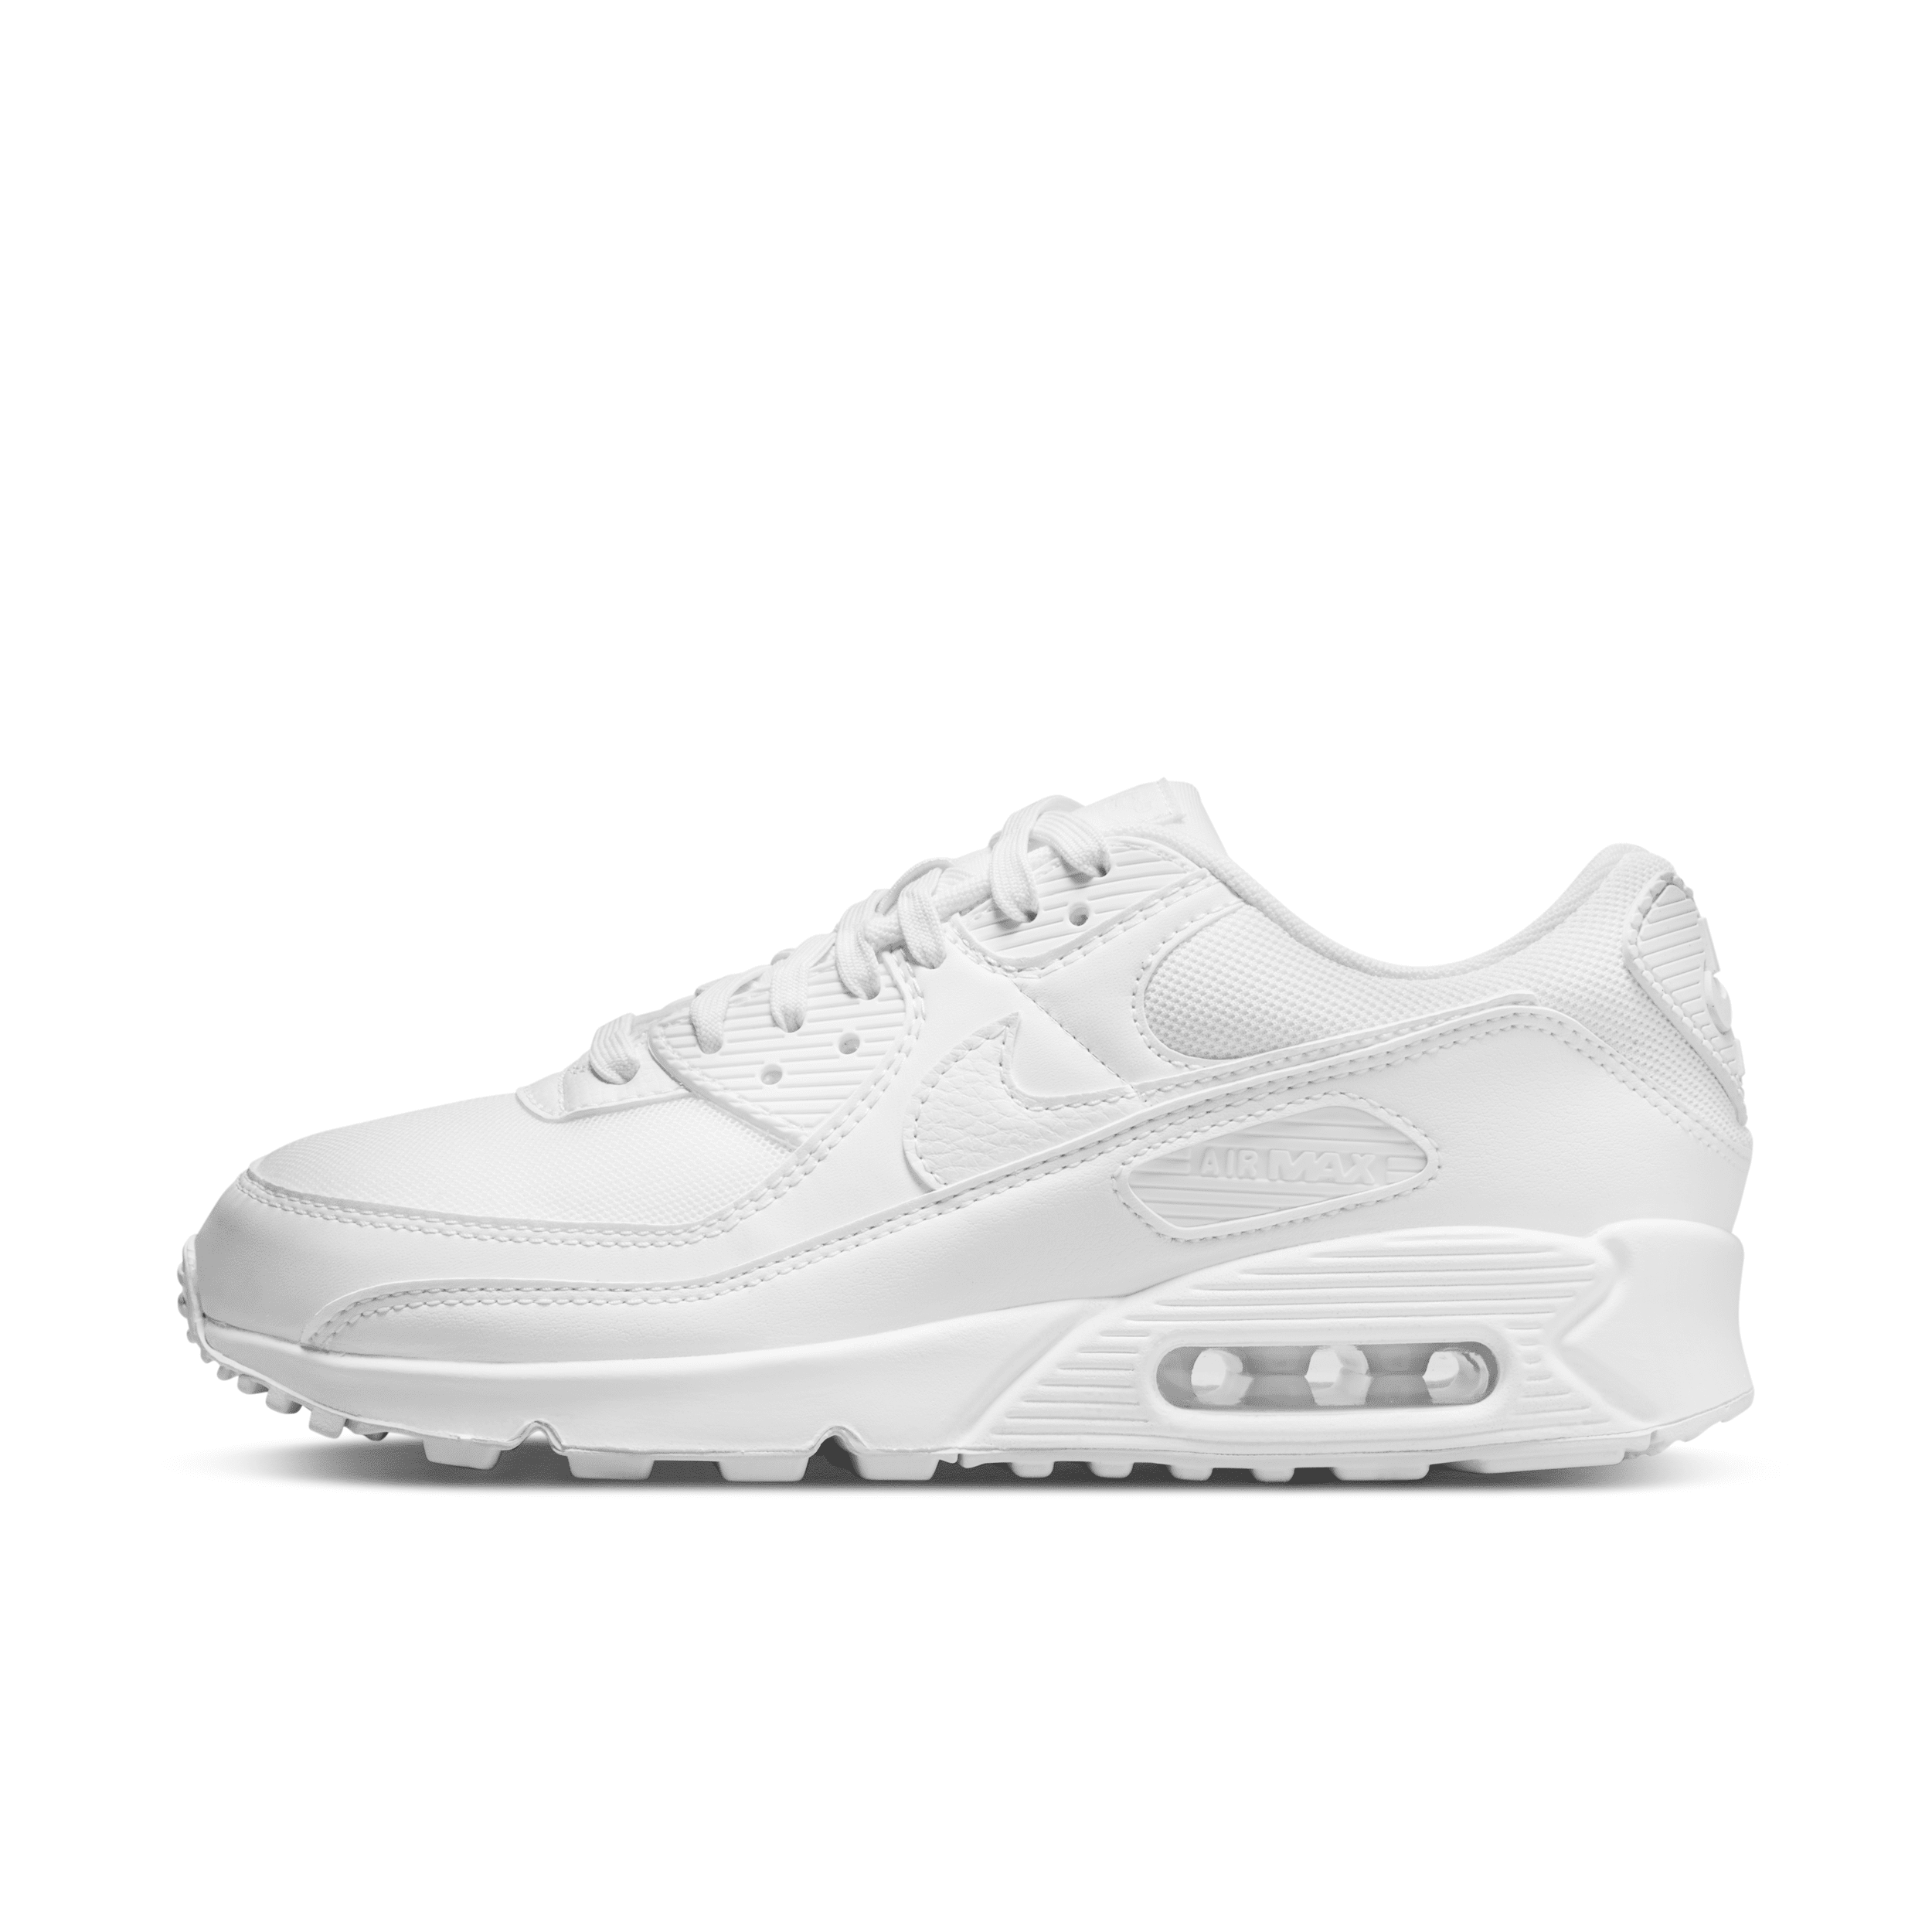 Nike Women's Air Max 90 Shoes in White, Size: 5.5 | DH8010-100